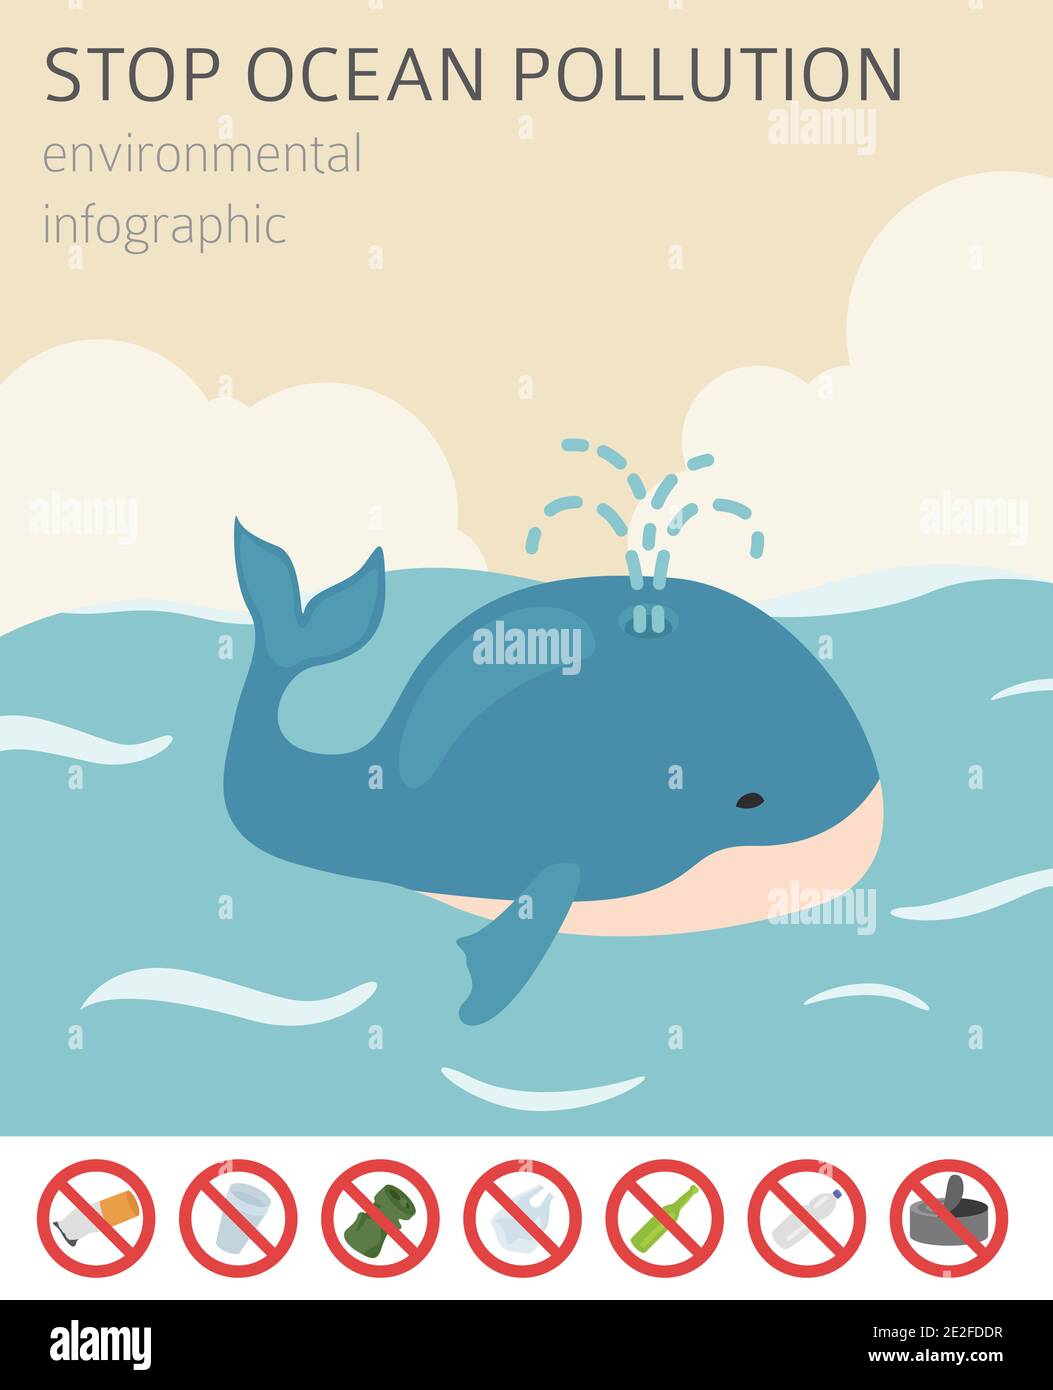 Global environmental problems. Ocean pollution isometric infographic. Vector illustration Stock Vector